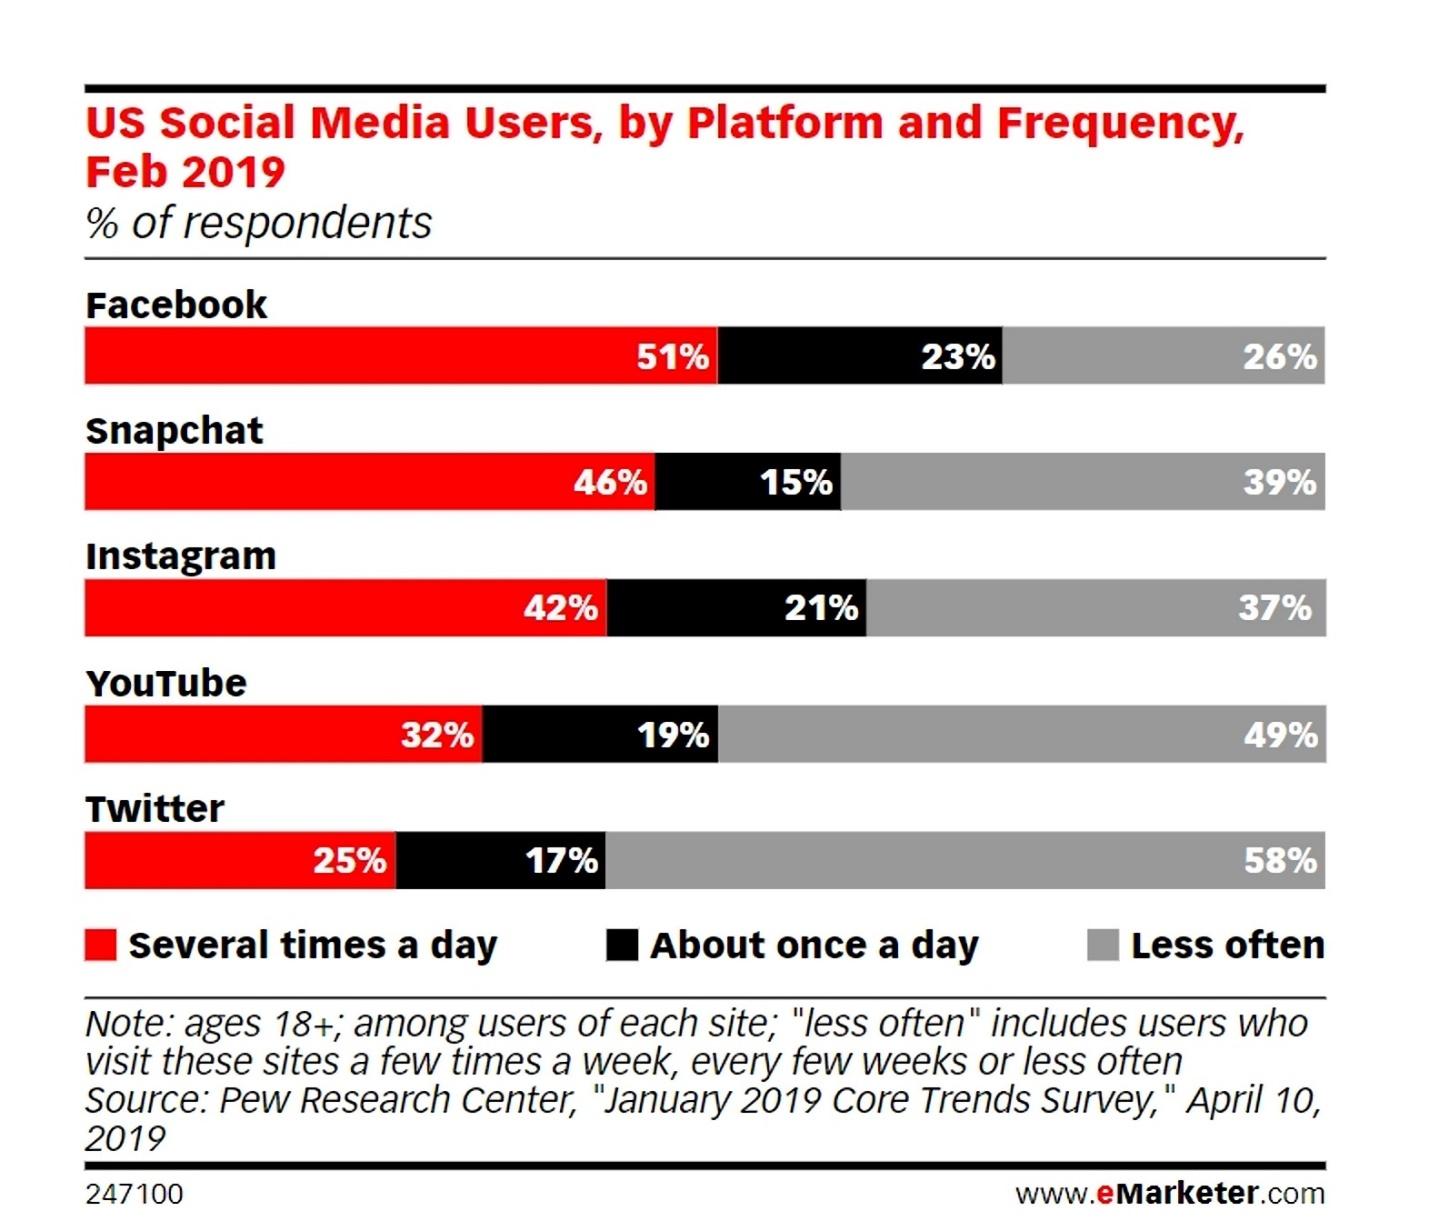 US Social Media users by platform and frequency stats